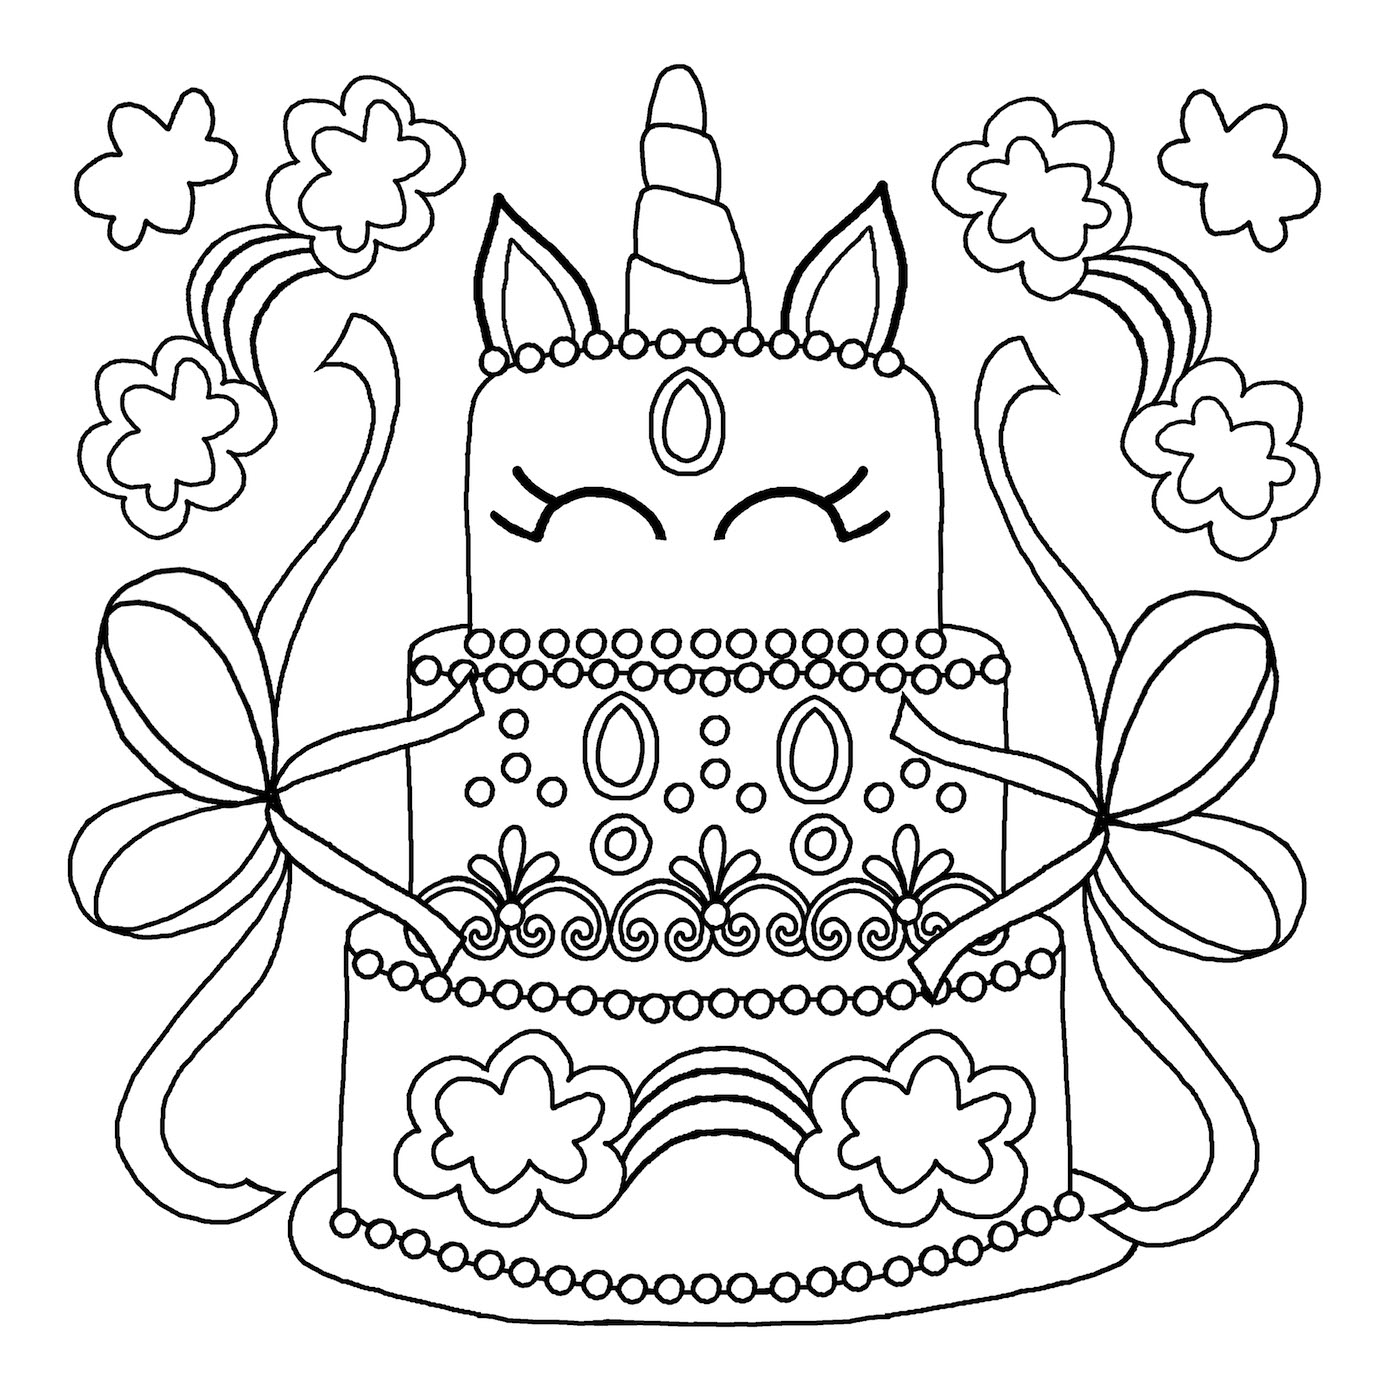 unicorn hard free printable coloring pages